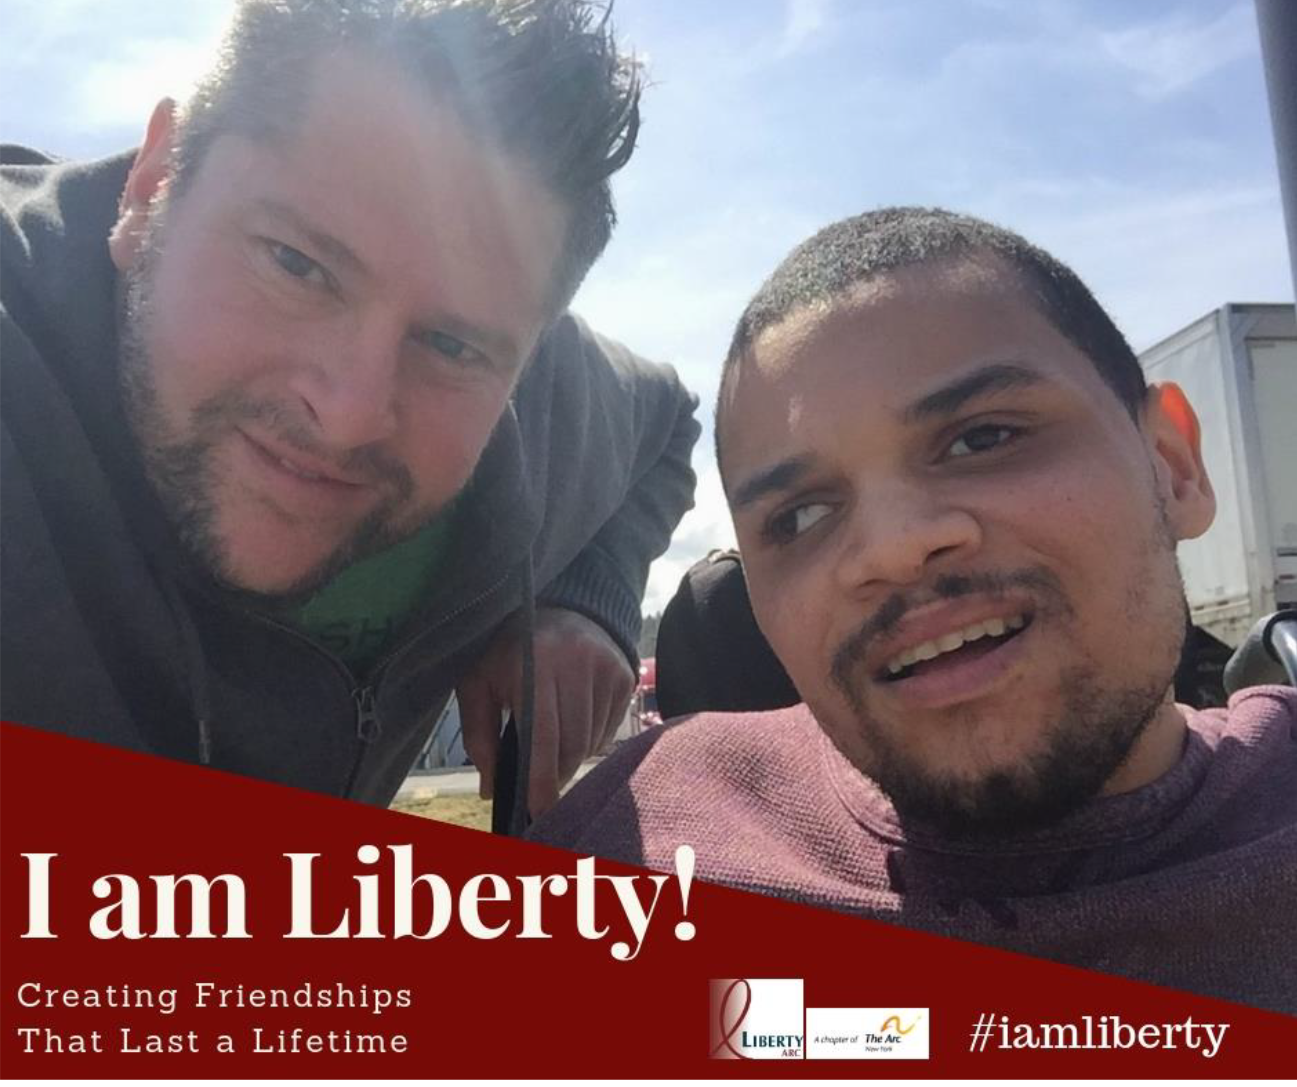 I am Liberty Story: Creating Friendships That Last a Lifetime. Headshot of Jeremy Purtell with man he supports at Liberty ARC.